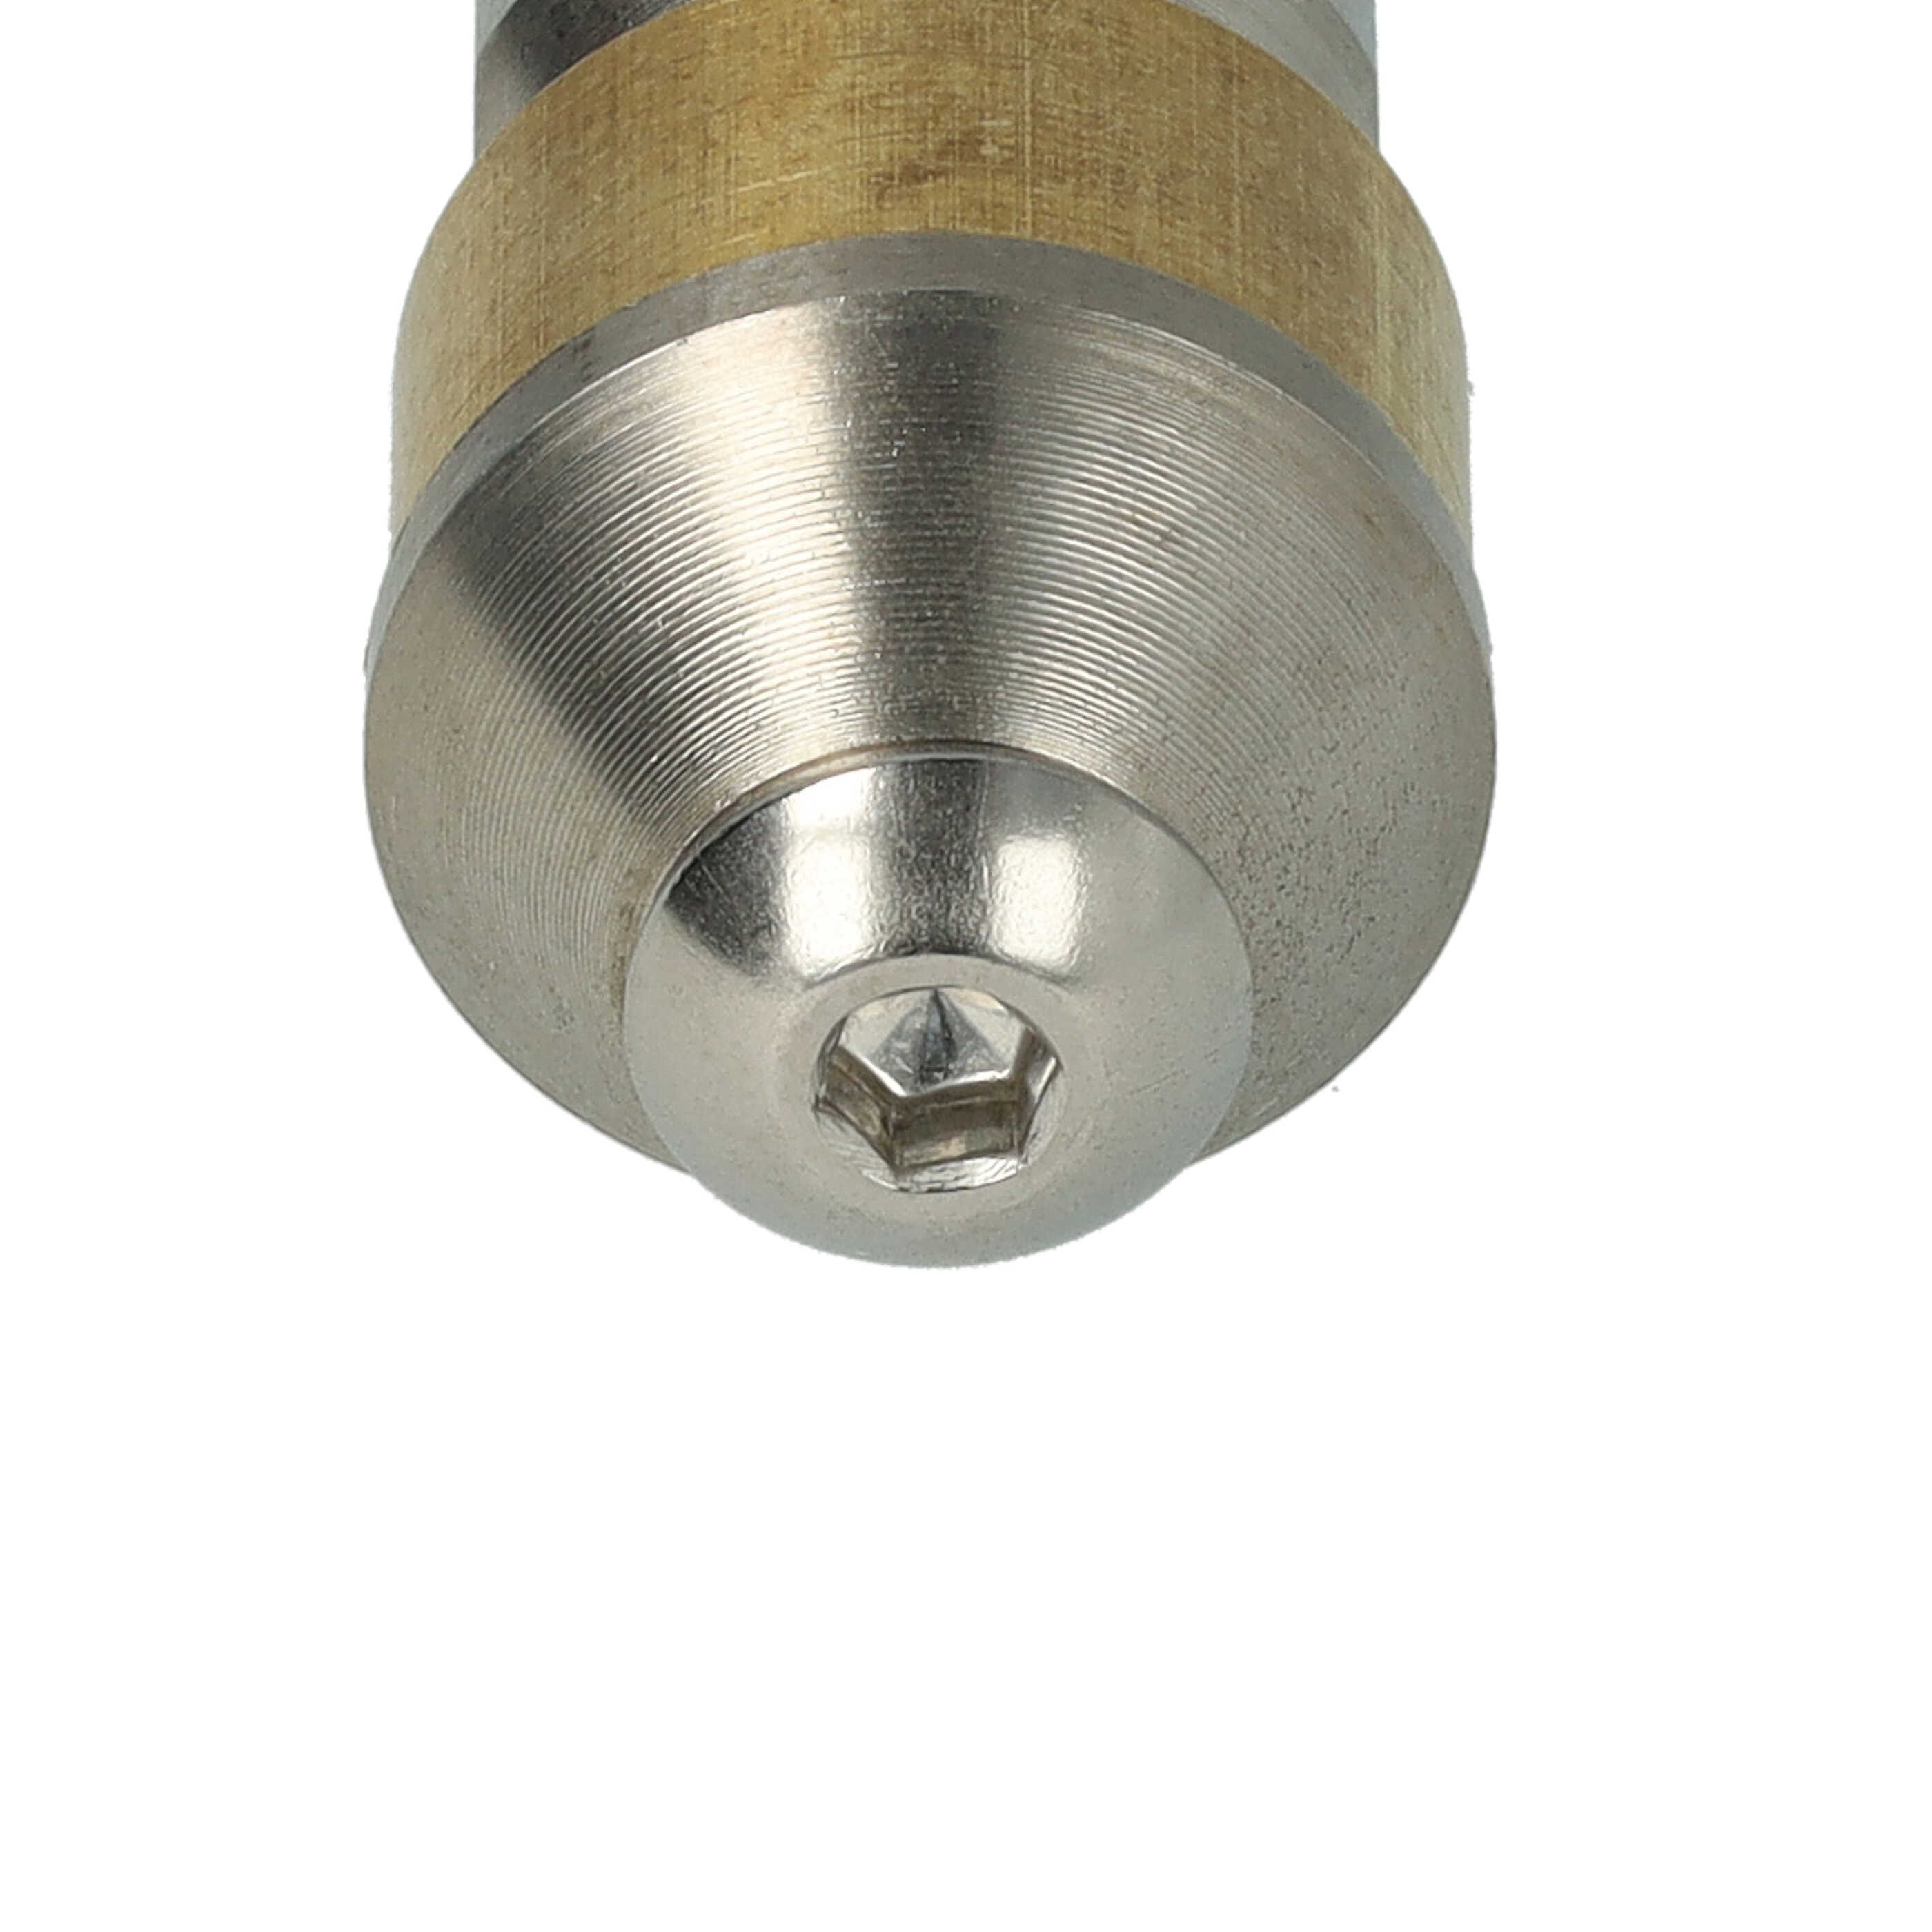 Pipe Cleaning Nozzle as Replacement for Kränzle KNR055 - Stainless Steel, Rotating